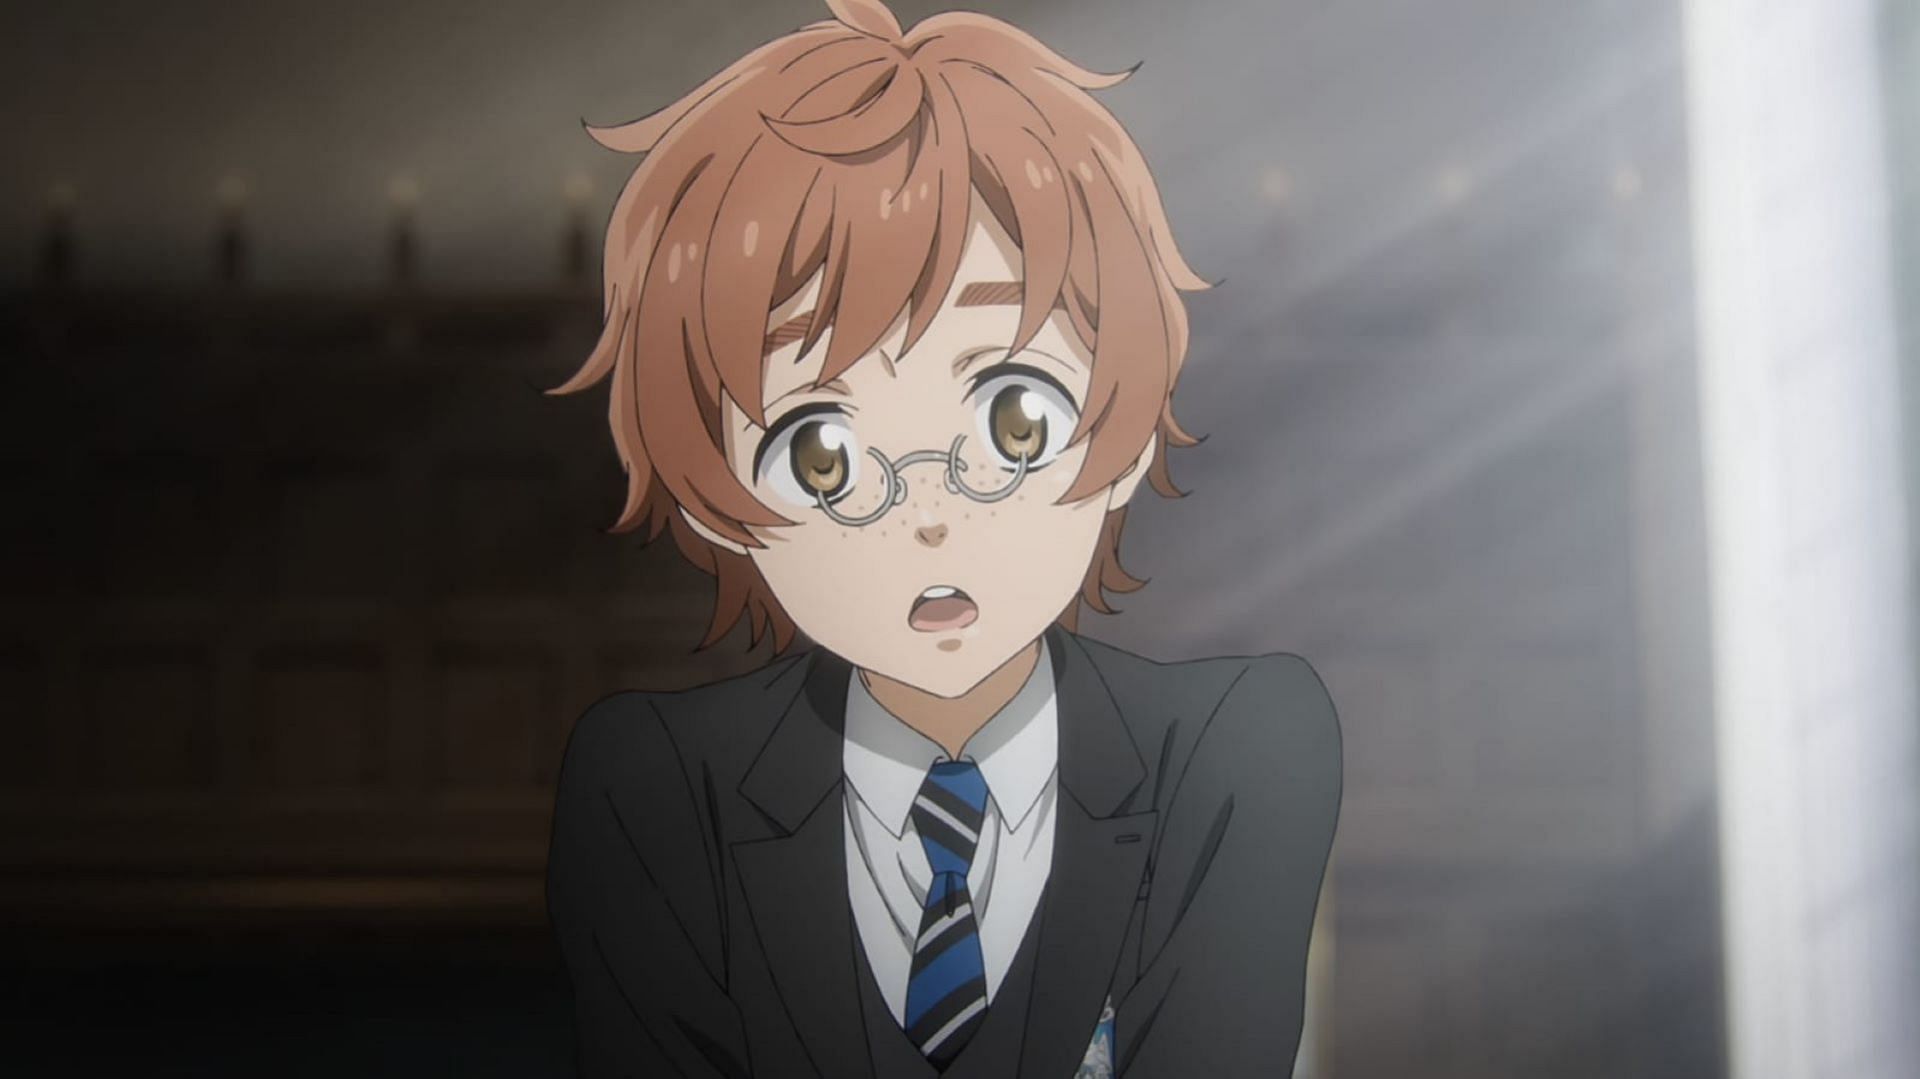 McMillan, as seen in the episode (Image via Cloverworks)